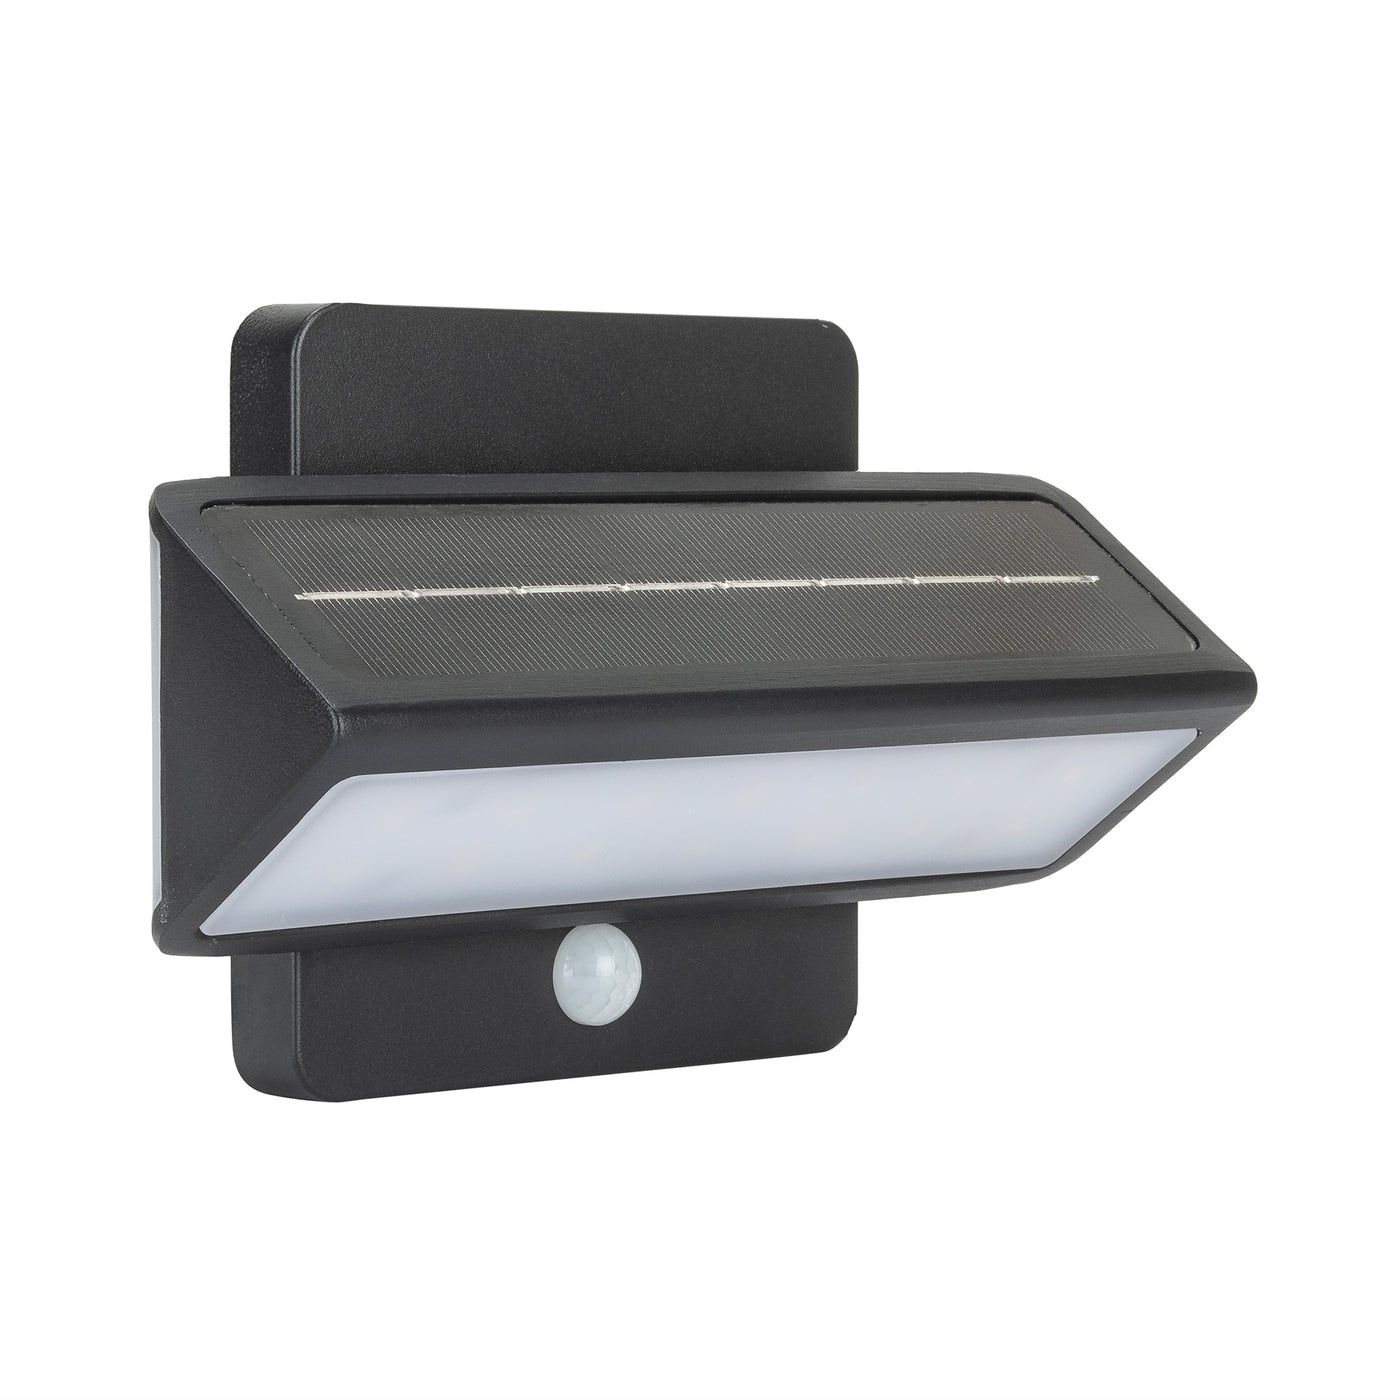 2PK Architectural Solar Wall Accent Light with Motion Sensor, 120 Lumens, 1.2W, 2700 CCT, Black or Bronze Finish